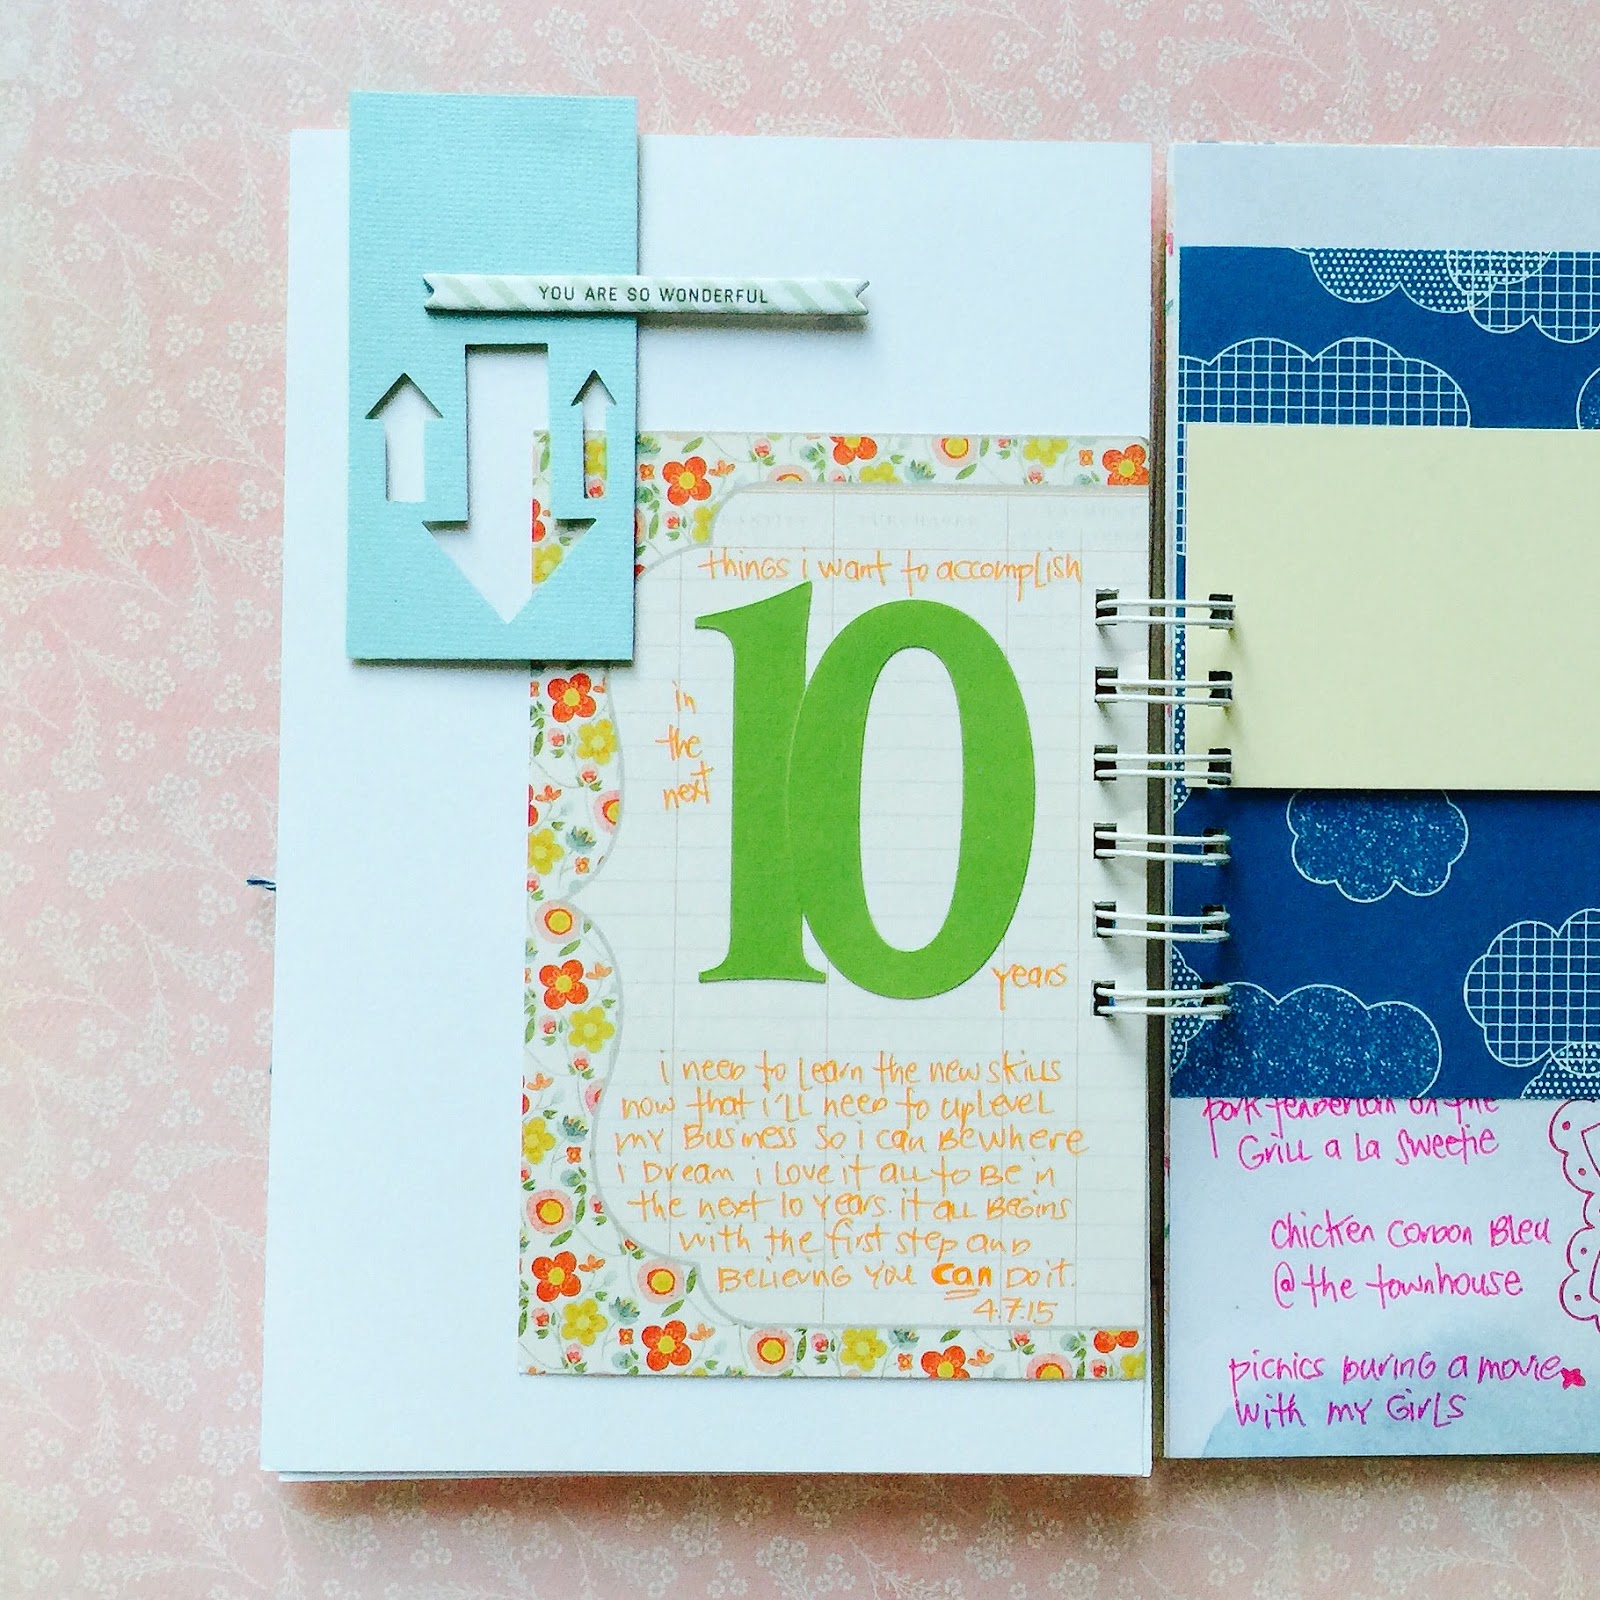 What I'm using in the #listersgottalist IG challenge...a Smash Book with Embellishment Pack from iloveitall.etsy.com